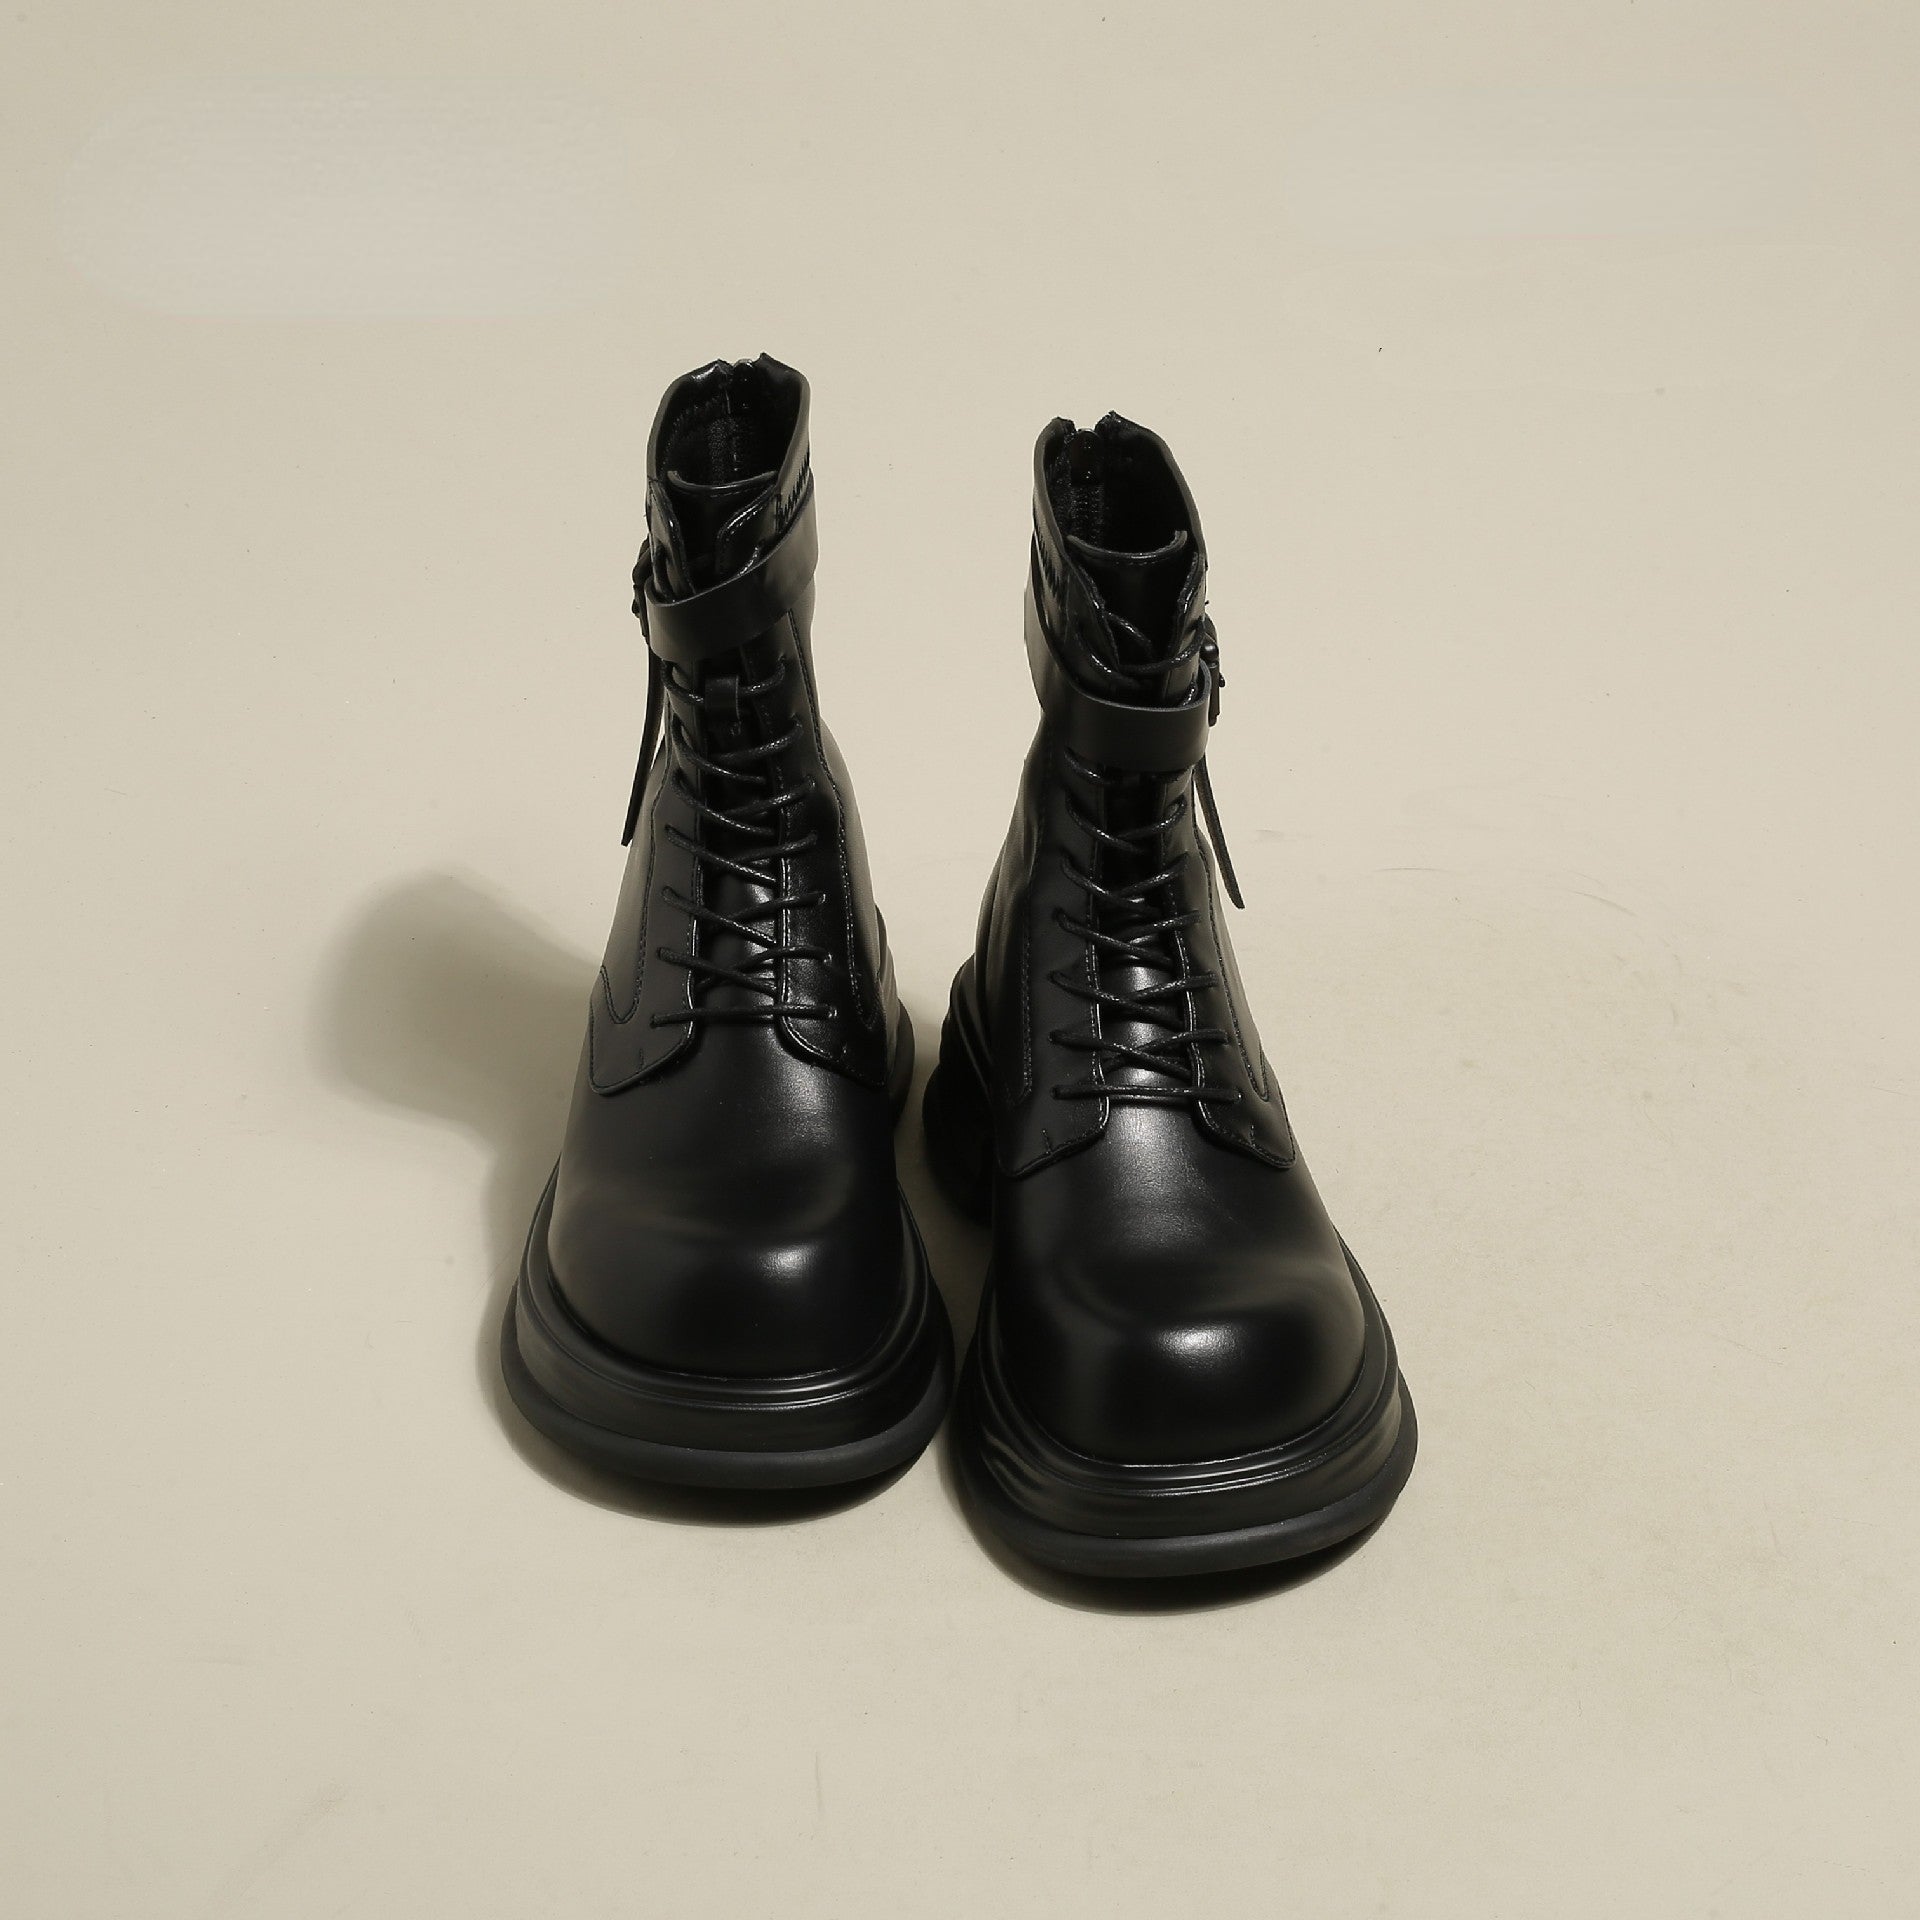 Dr. Martens Boots ladies new fashion cool boots